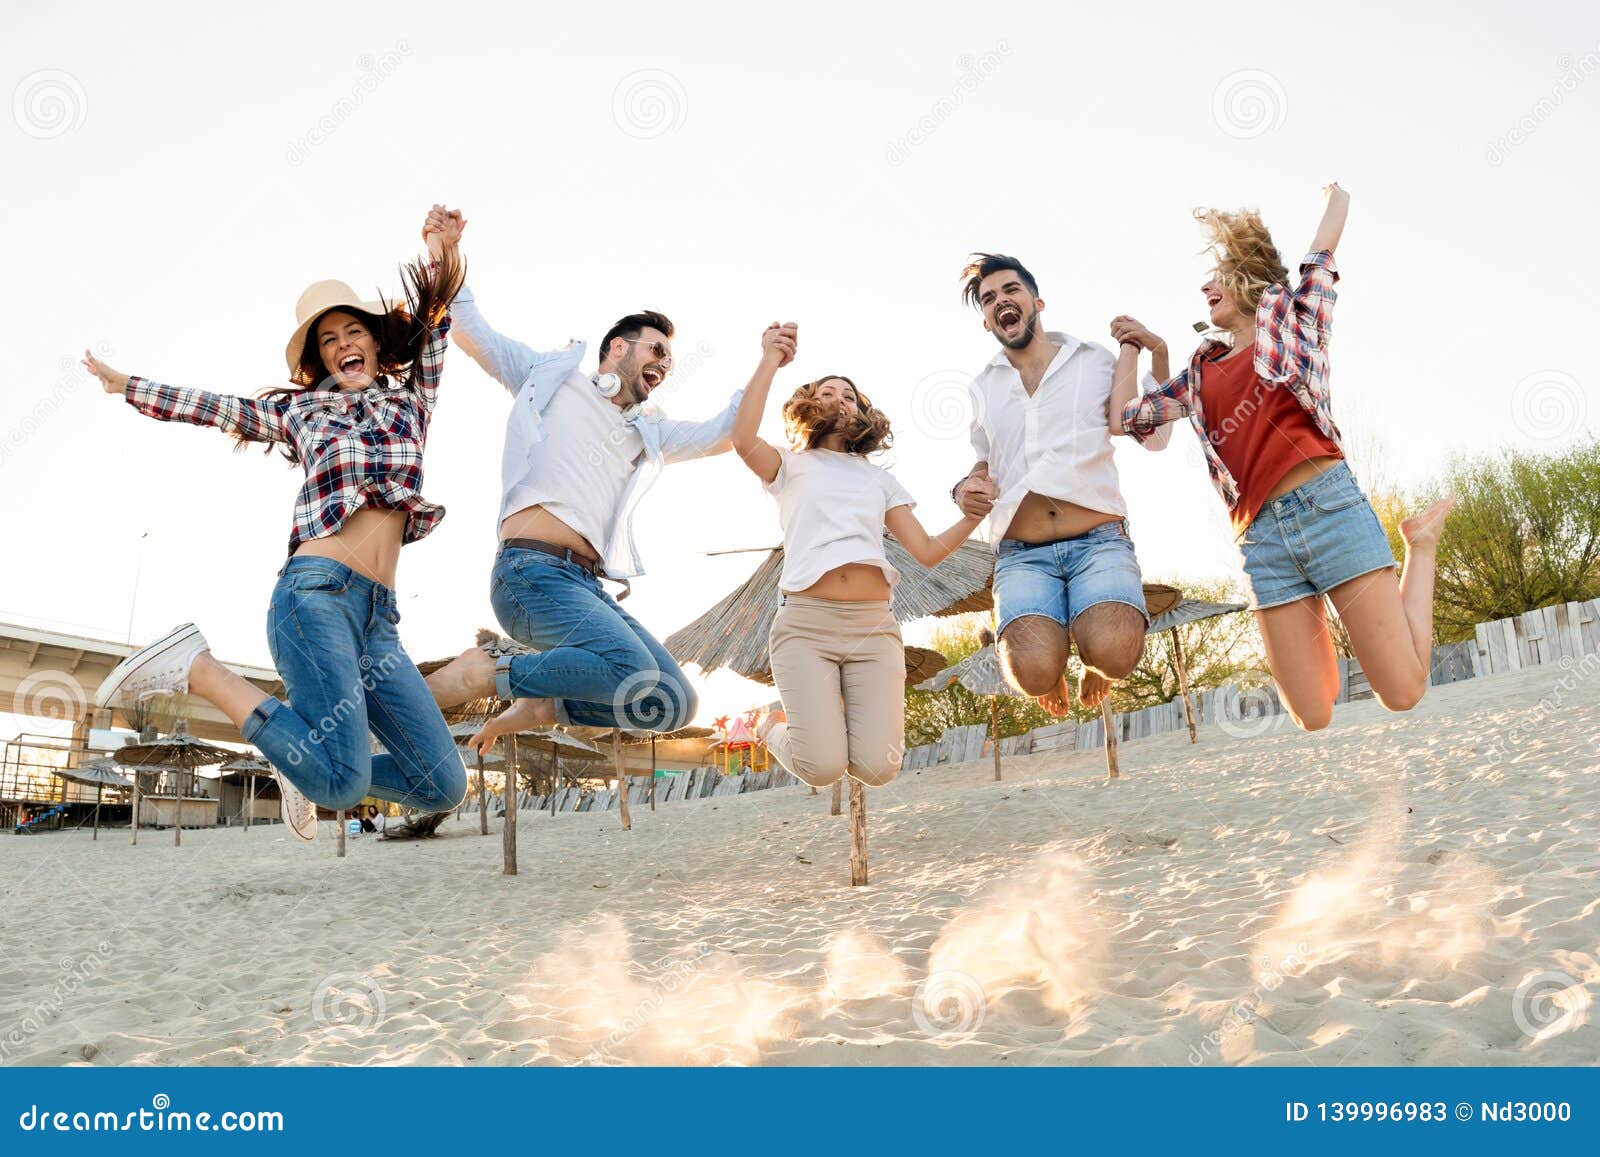 Friends Partying and Having Fun on Beach at Summer Stock Image - Image ...